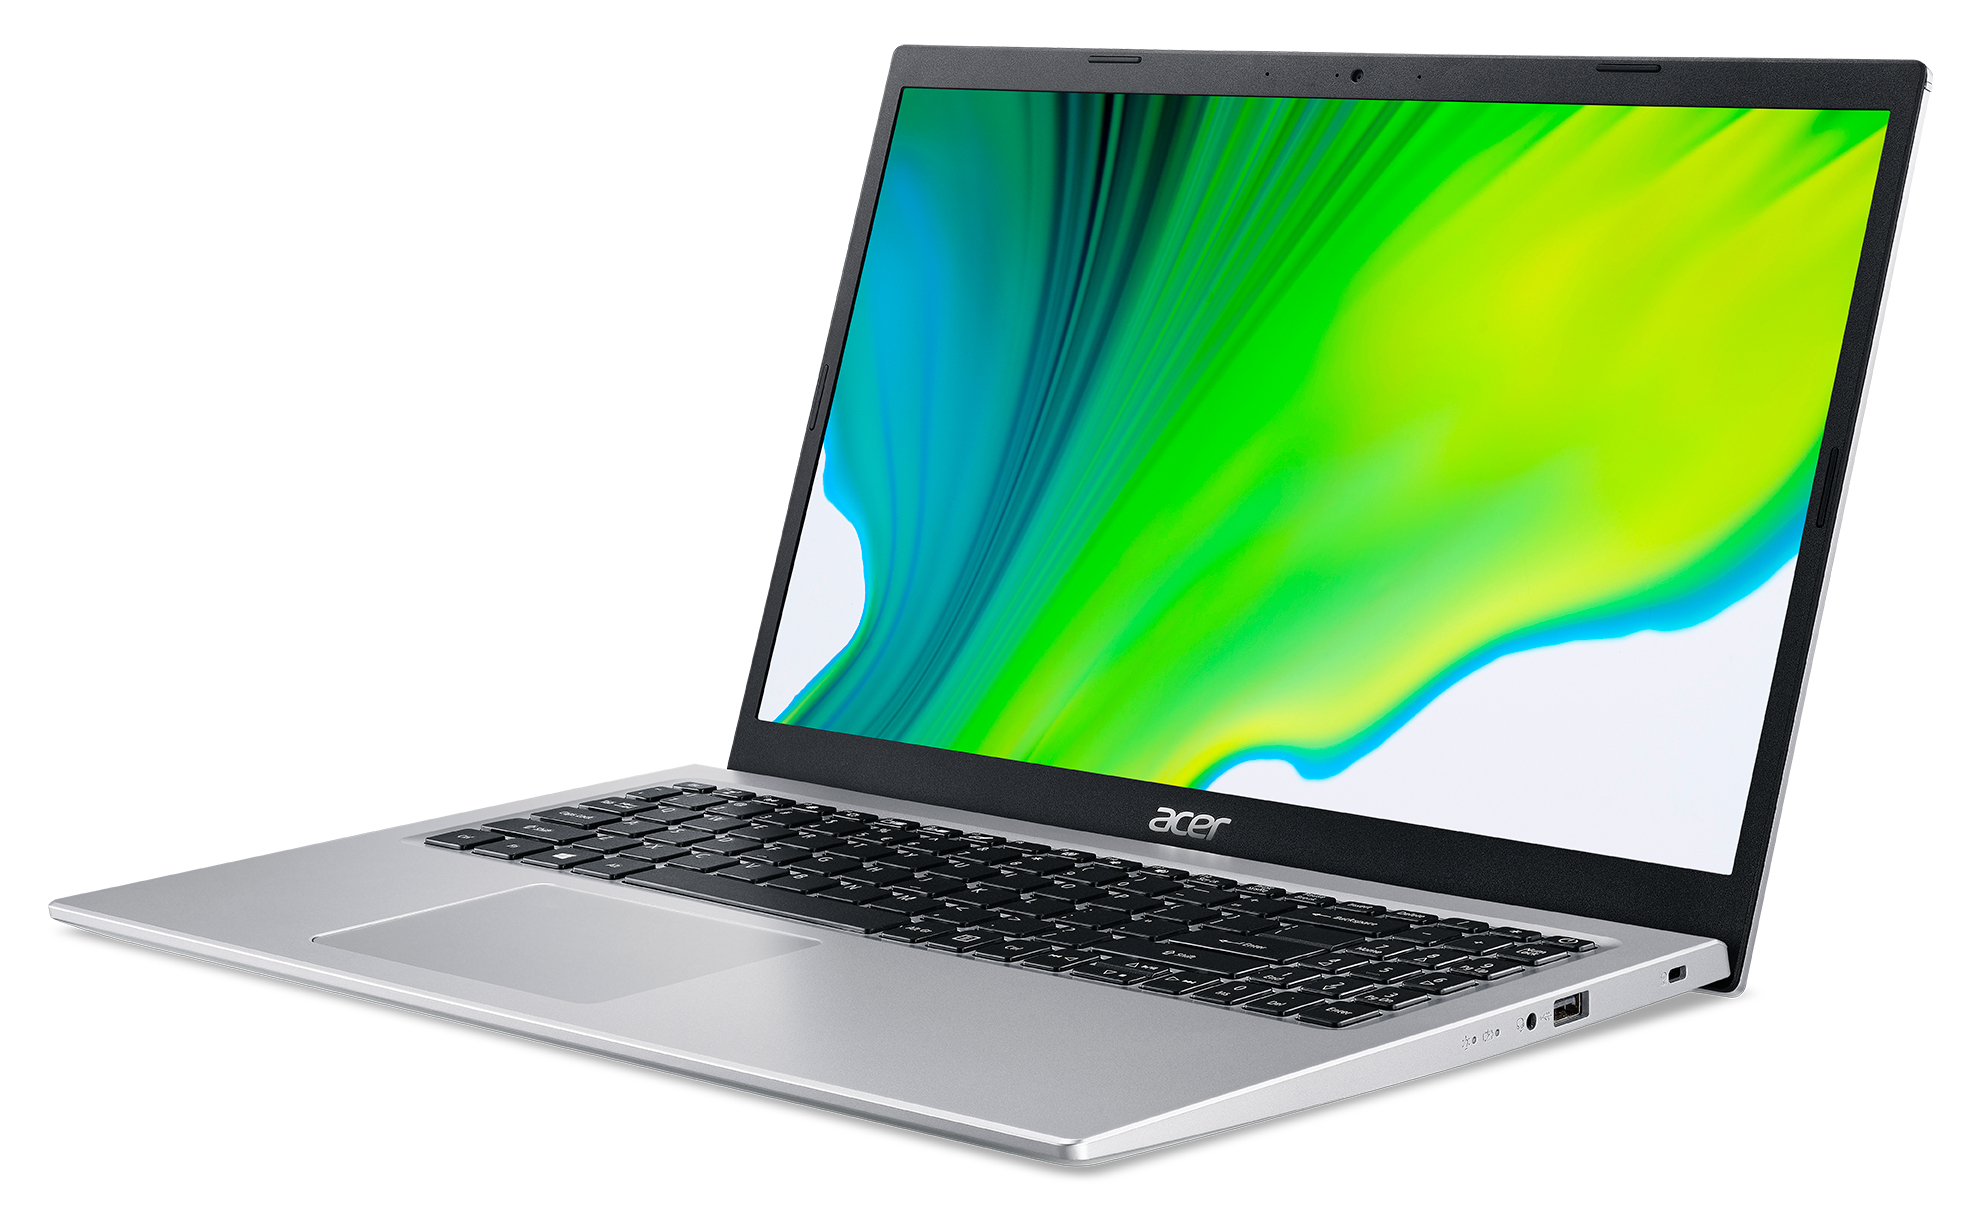 ACER Acer Aspire 5 (A515-56-560W), mit RAM, Graphics, Iris Display, Silber SSD, 8 Core™ Zoll GB Xe i5 512 GB Prozessor, 15,6 Intel® Notebook Intel